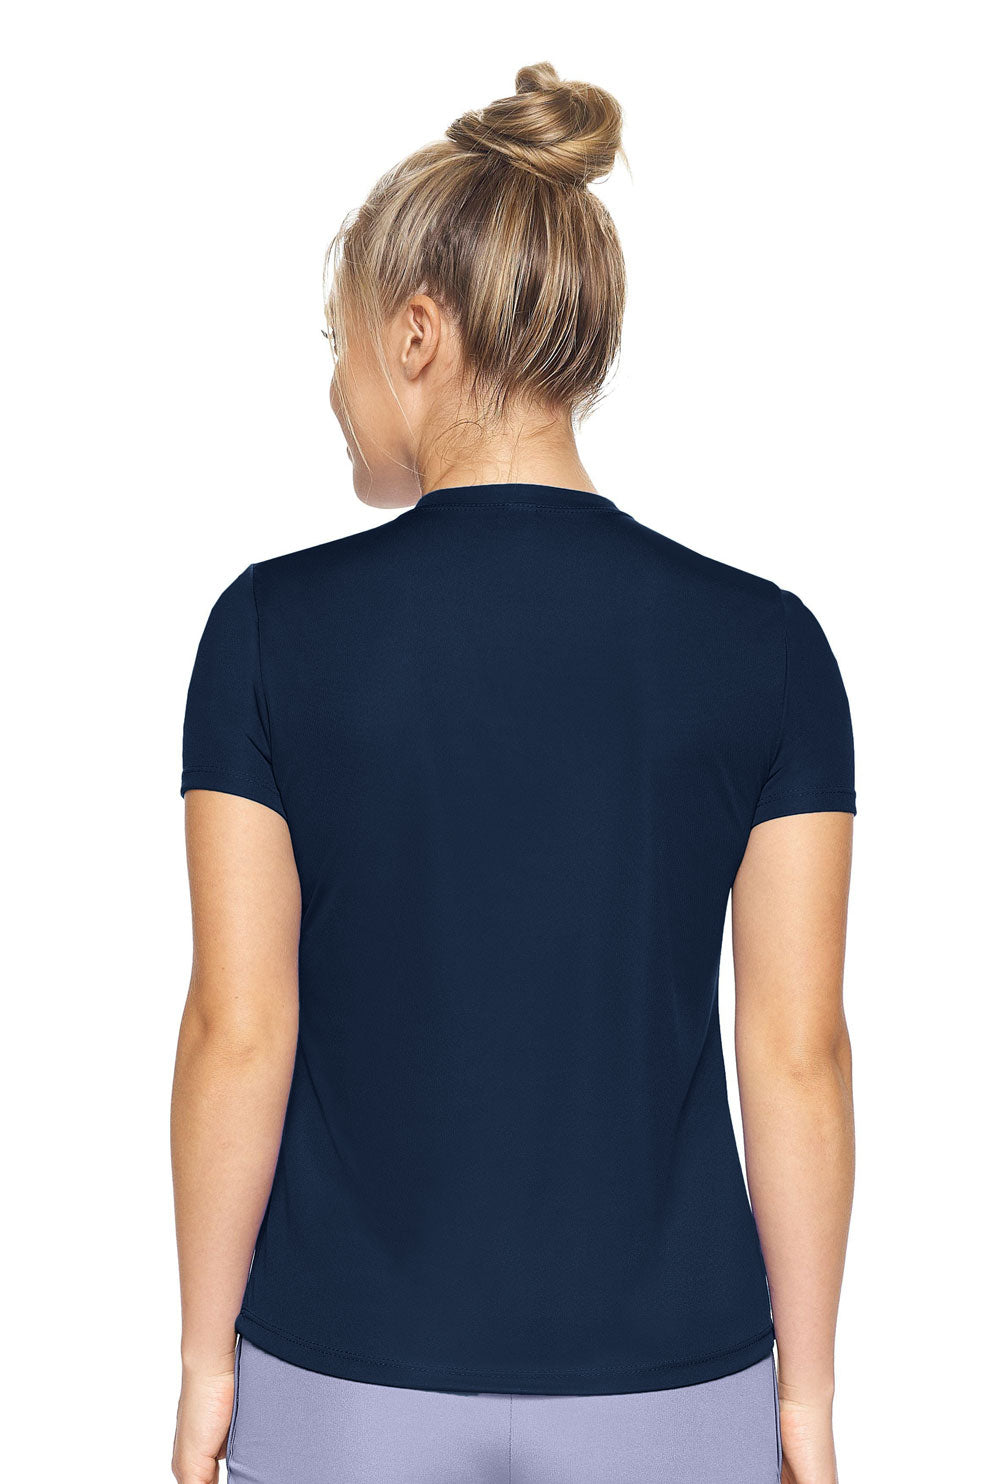 Expert Brand Wholesale Women's DriMax Crewneck Performance Tee Made in USA AI201 navy image 3#navy